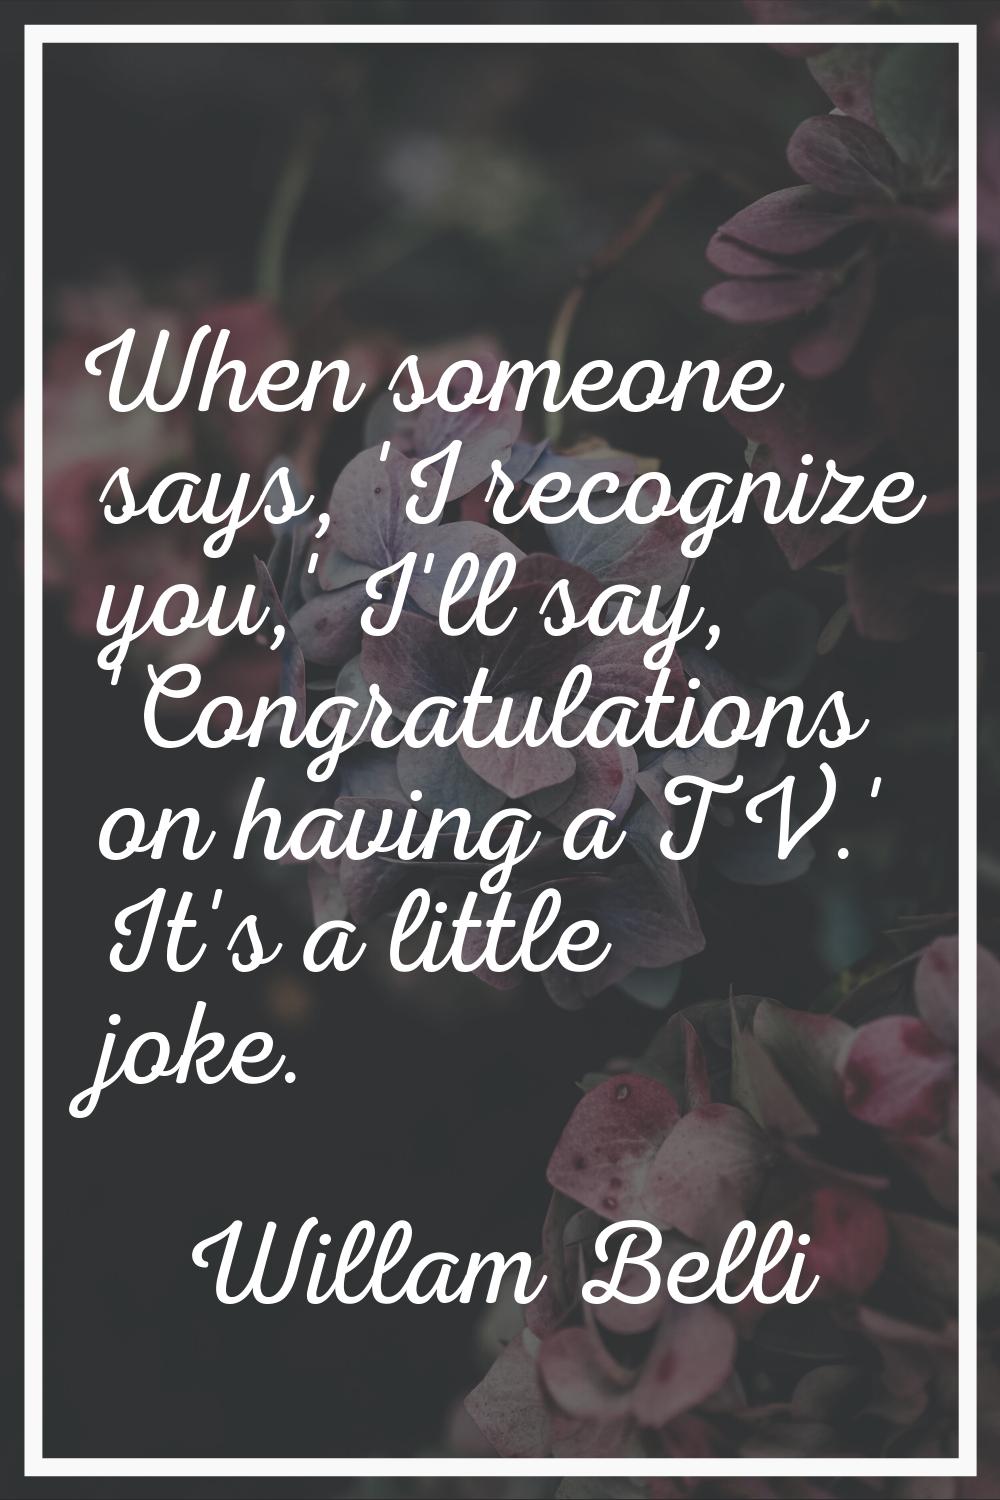 When someone says, 'I recognize you,' I'll say, 'Congratulations on having a TV.' It's a little jok